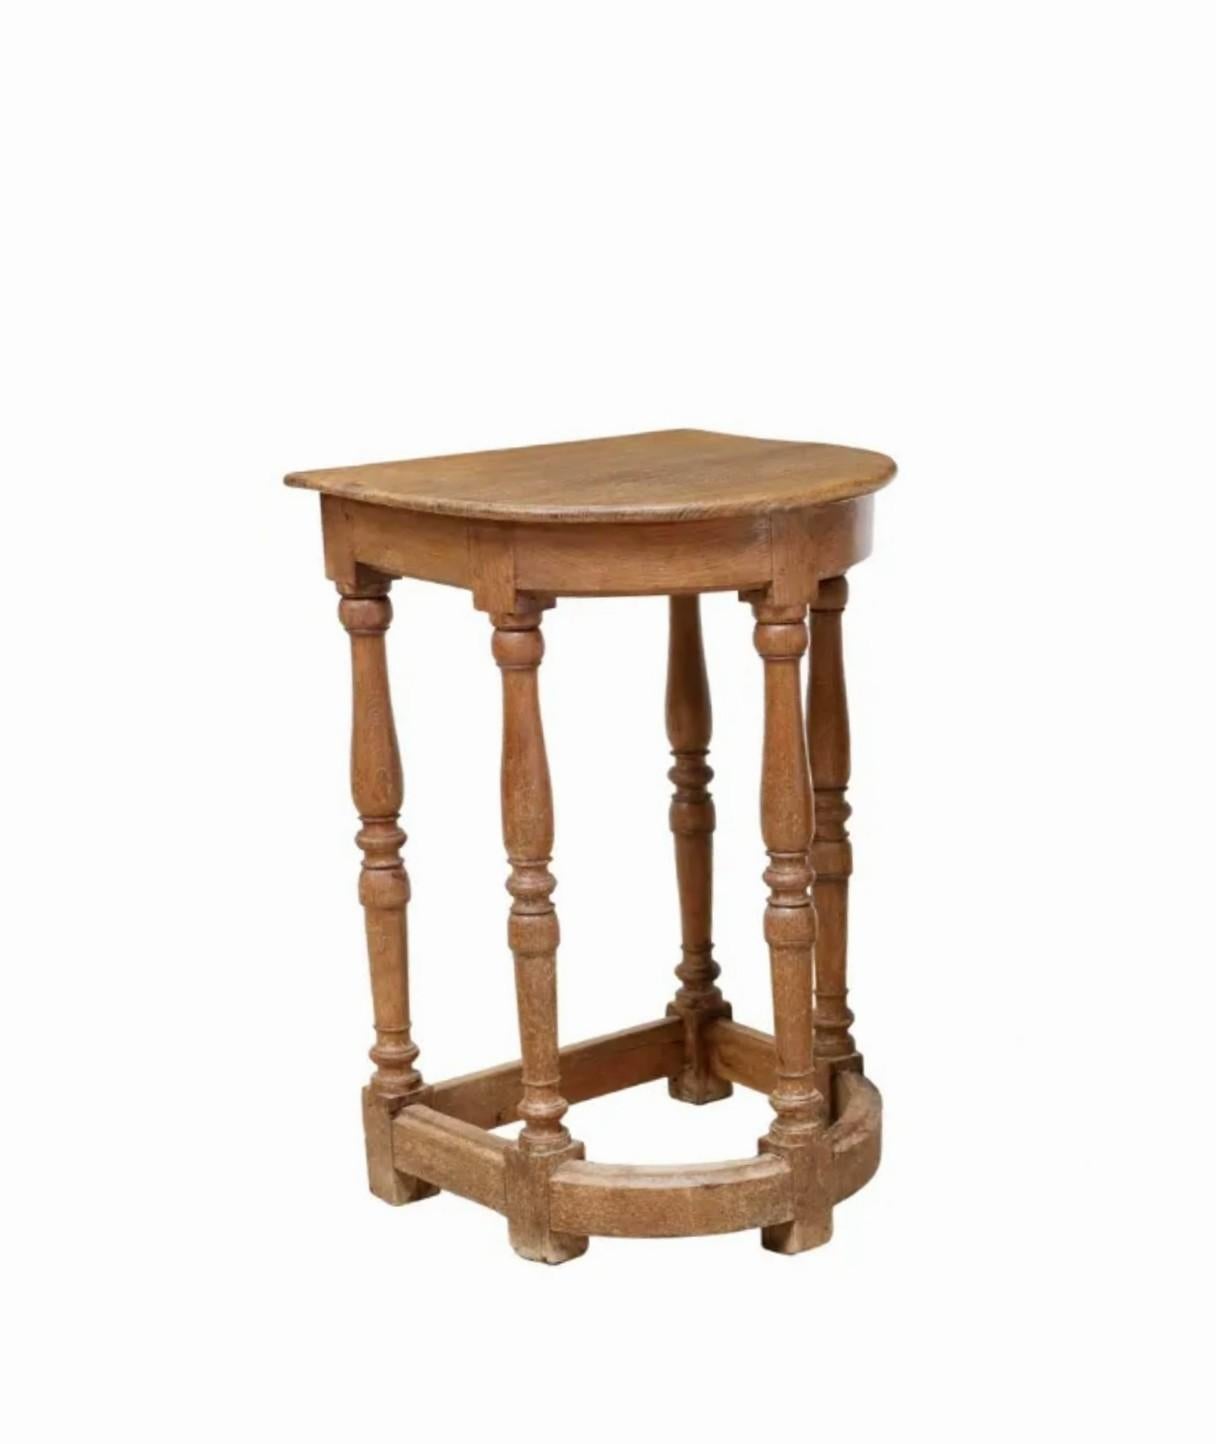 Rustic 18th/19th Century Country Continental Oak Side Table In Fair Condition For Sale In Forney, TX